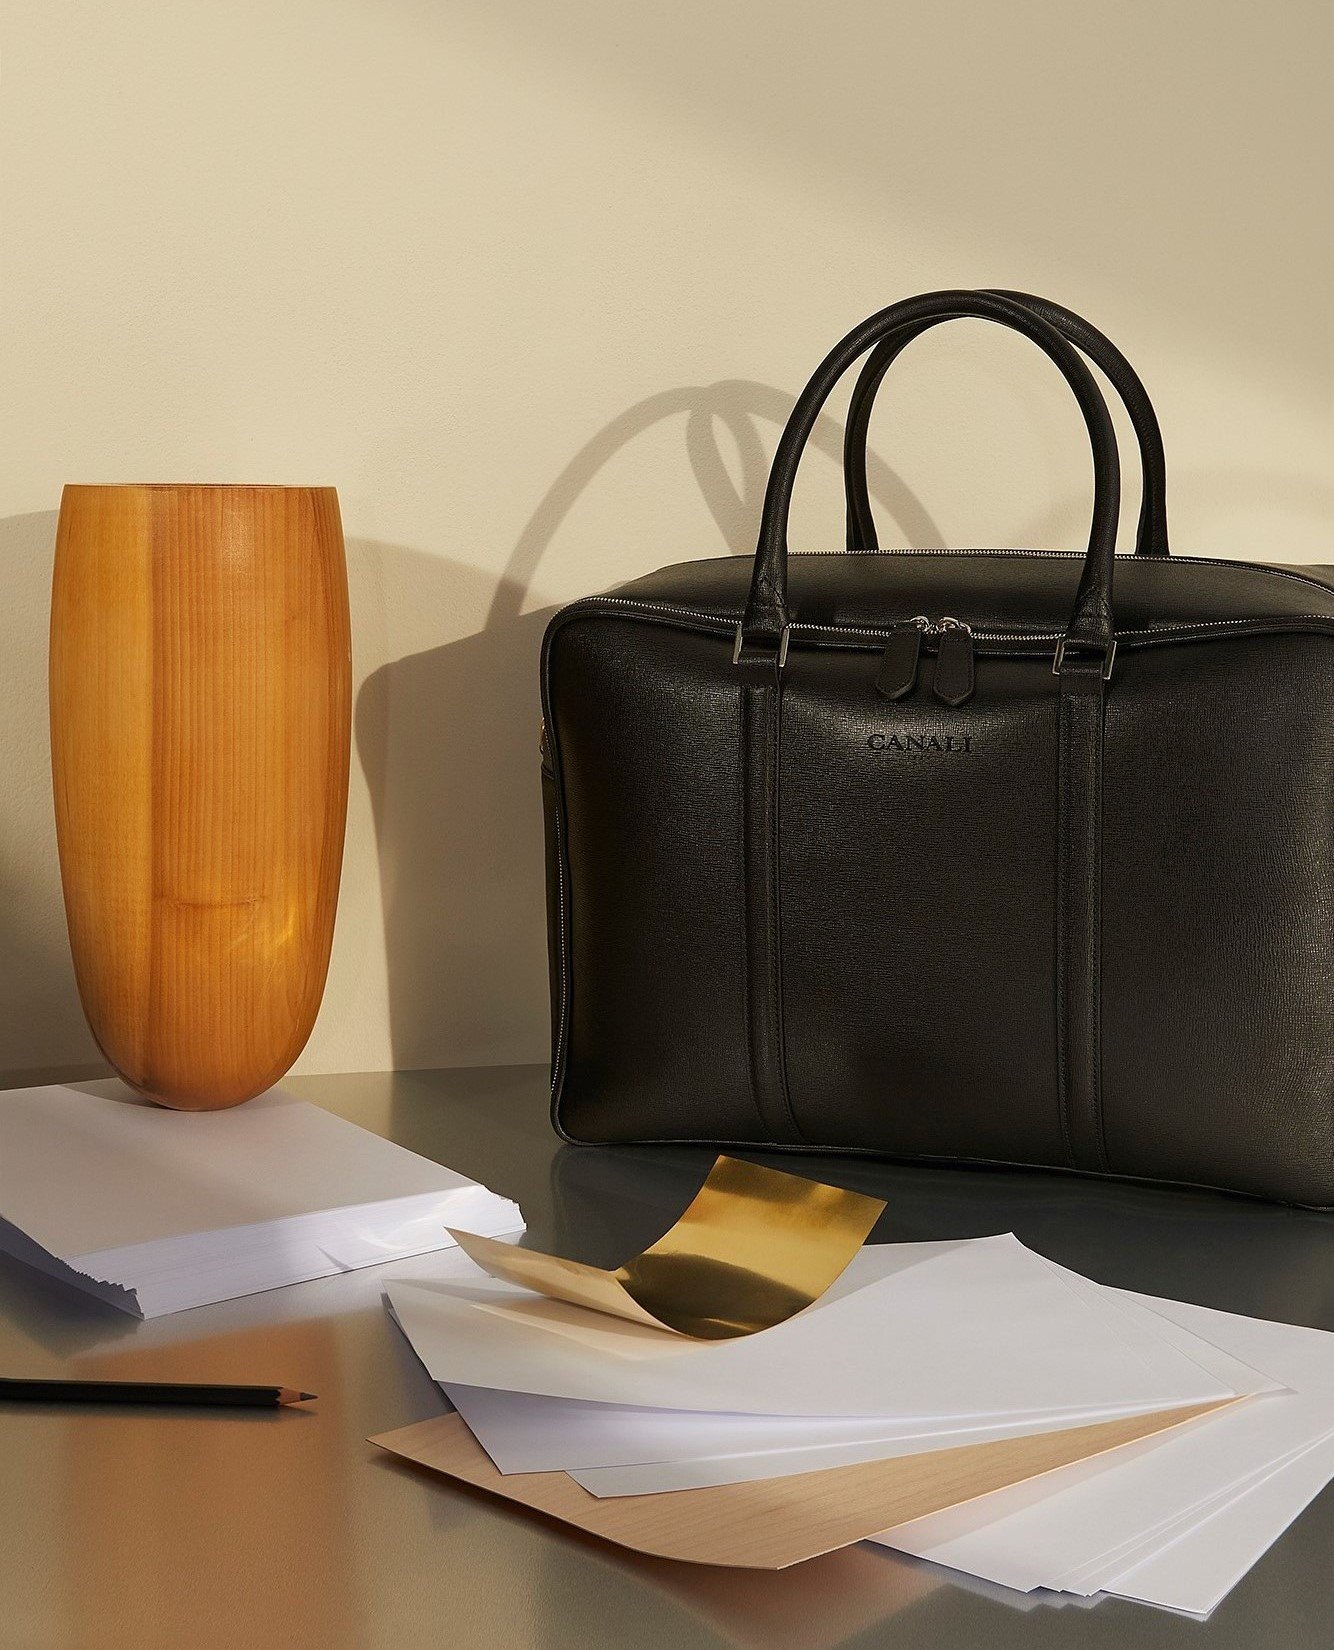 kollektion kerne Perversion Canali on X: "A refined and contemporary alternative to the classic  briefcase. #accessories #menswear #business #black #leather #bag  https://t.co/XZiL9vkJBp" / X